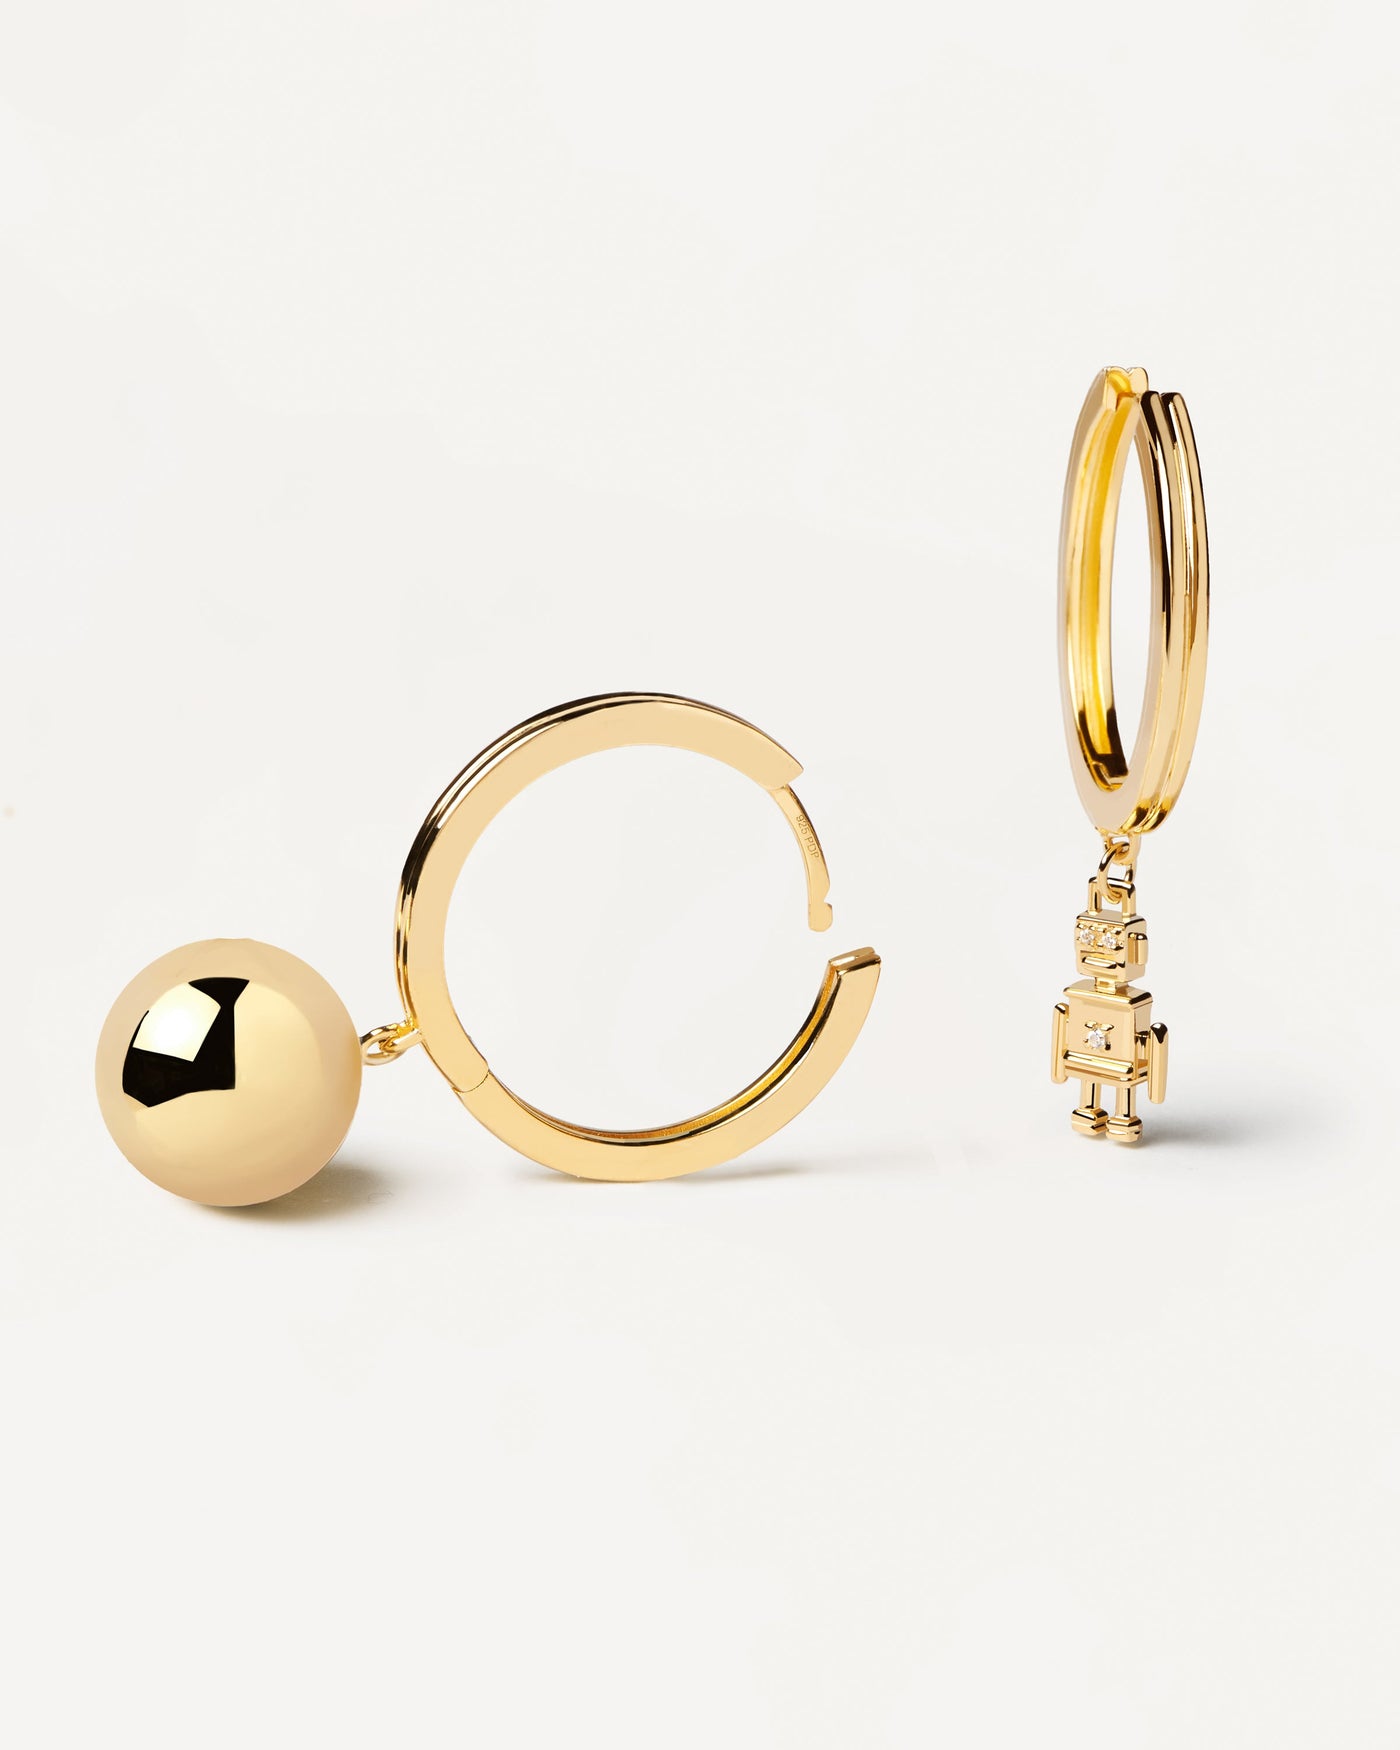 2023 Selection | Space Age Earrings. Gold-plated silver hoops with asymetric design: ball vs robot design. Get the latest arrival from PDPAOLA. Place your order safely and get this Best Seller. Free Shipping.